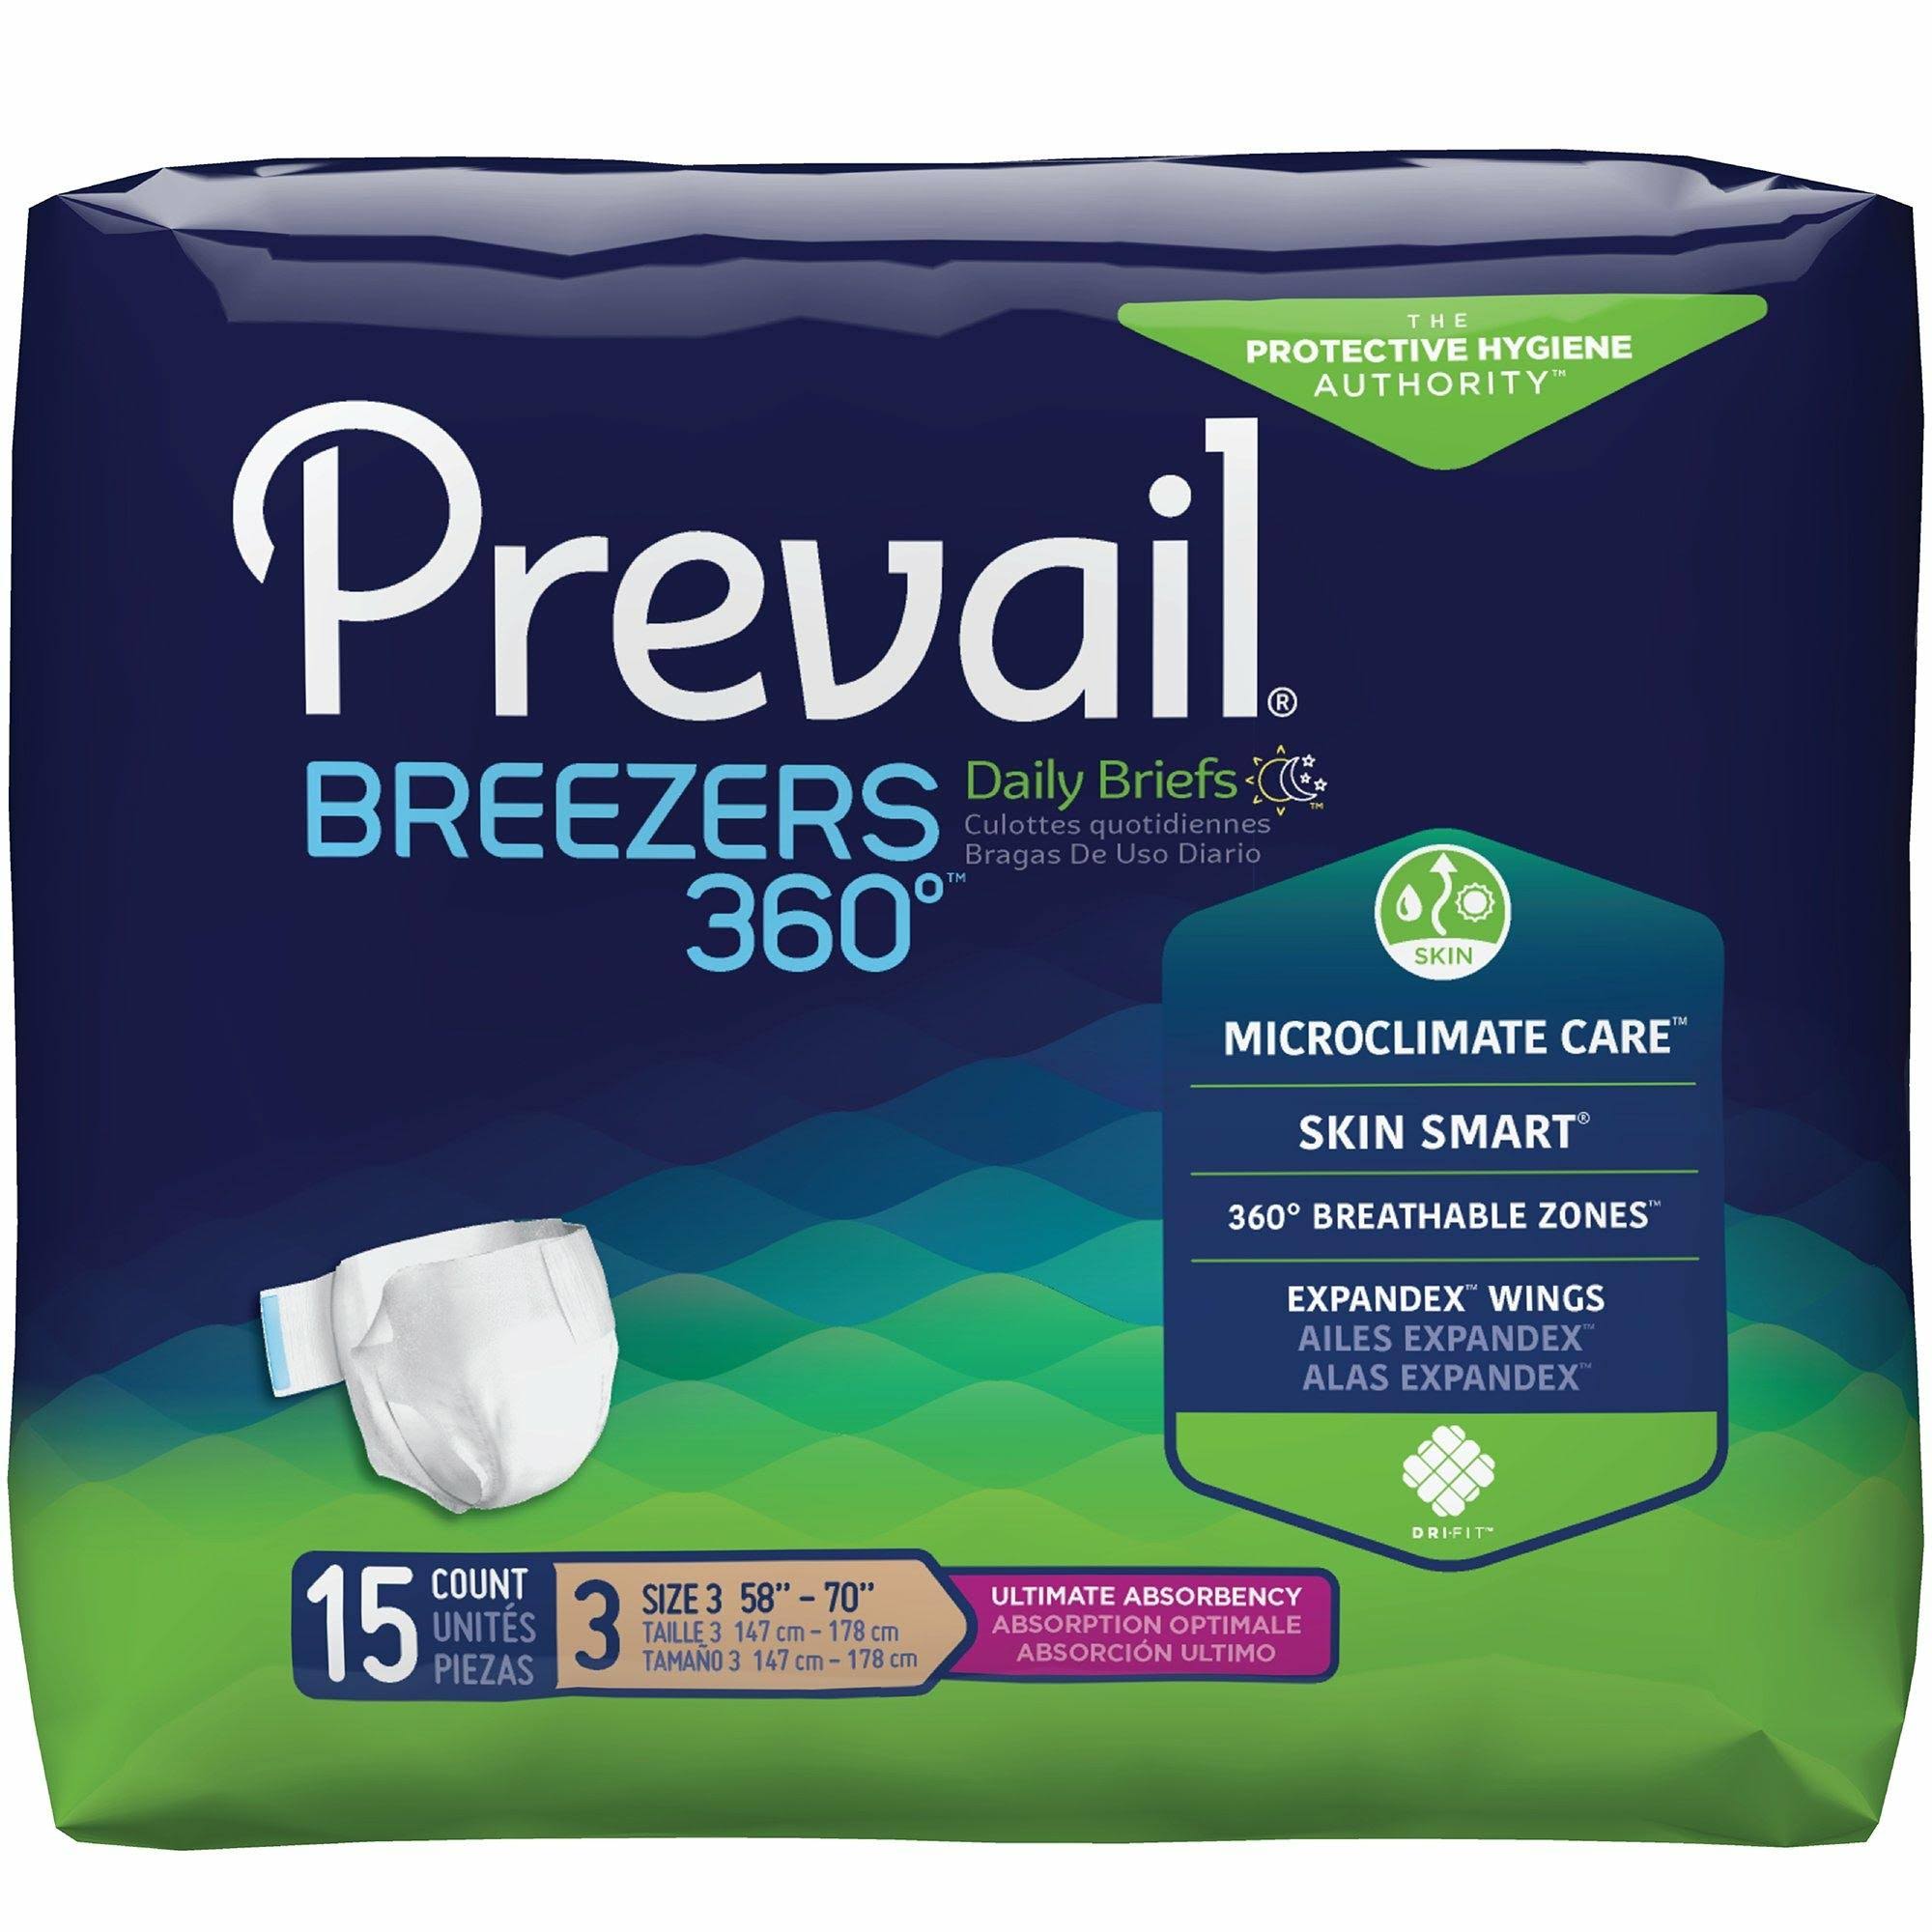 Prevail Unisex Breezers Absorbency Incontinence Briefs - Size 3, 15ct